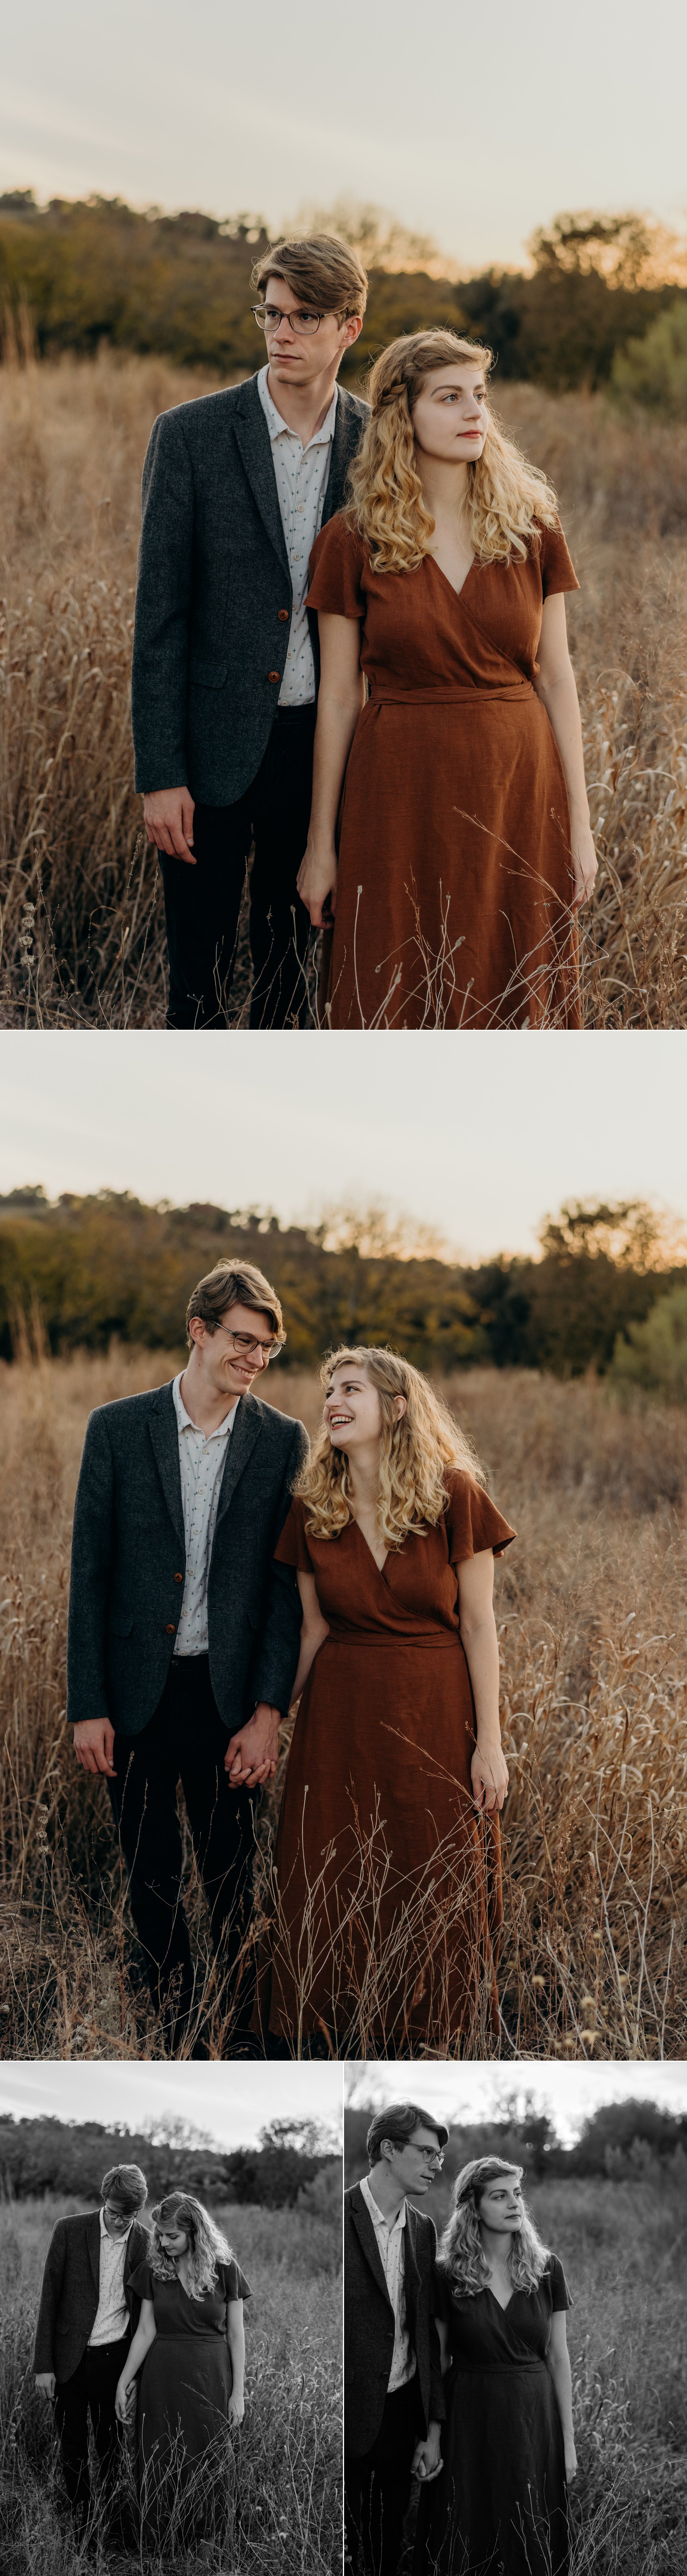  couple in field commons ford ranch park austin texas engagement session 